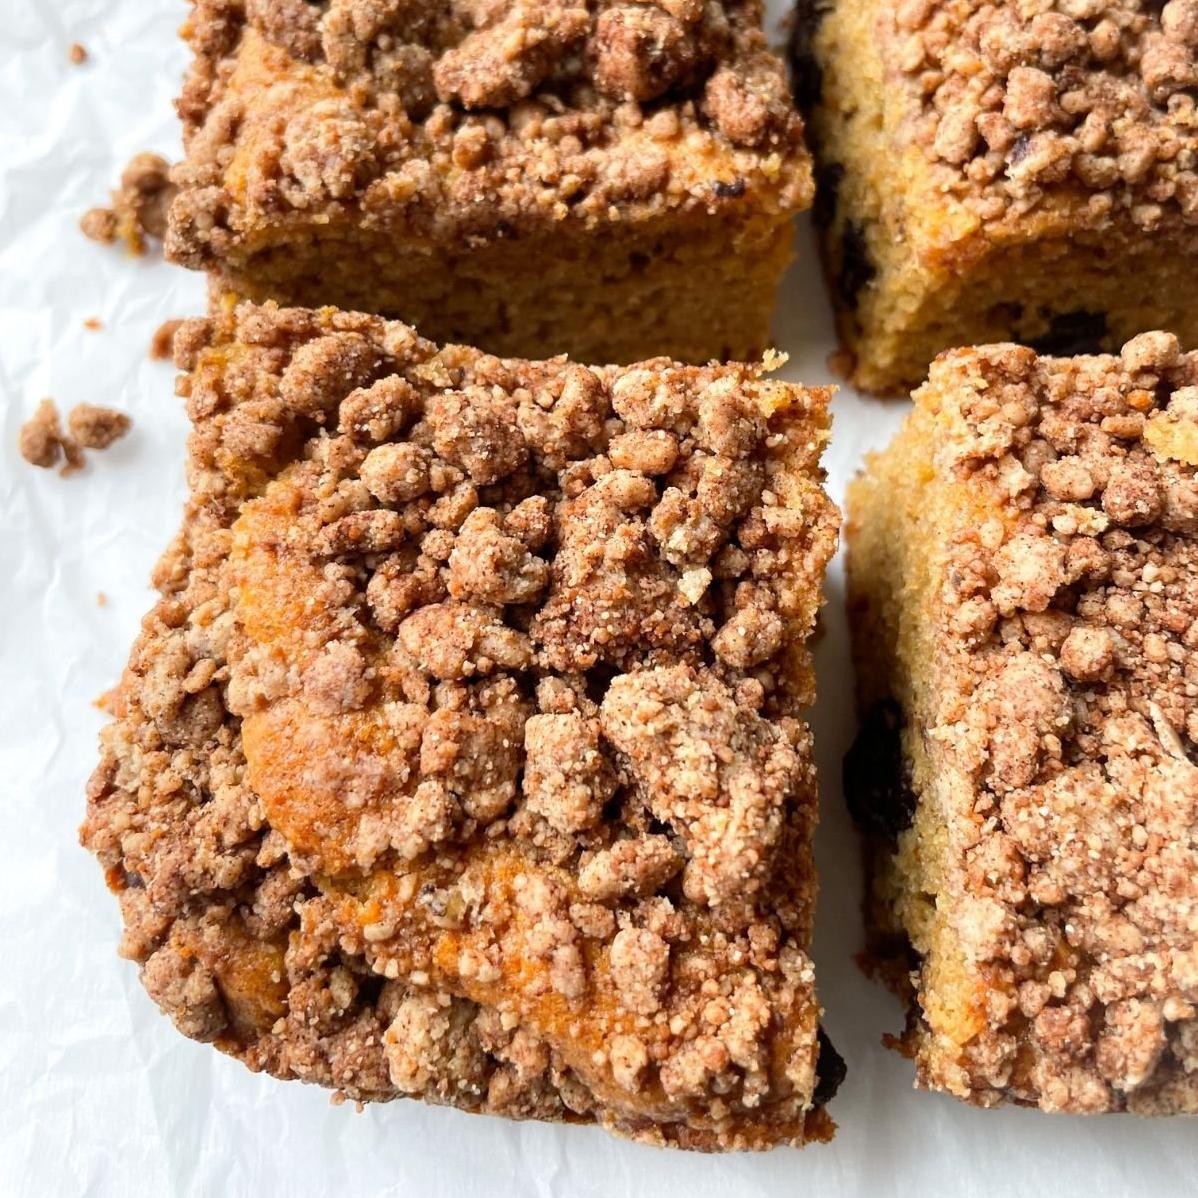  Who needs eggs and dairy when you can make delicious vegan coffee cake that's healthier, yummier and cruelty-free?